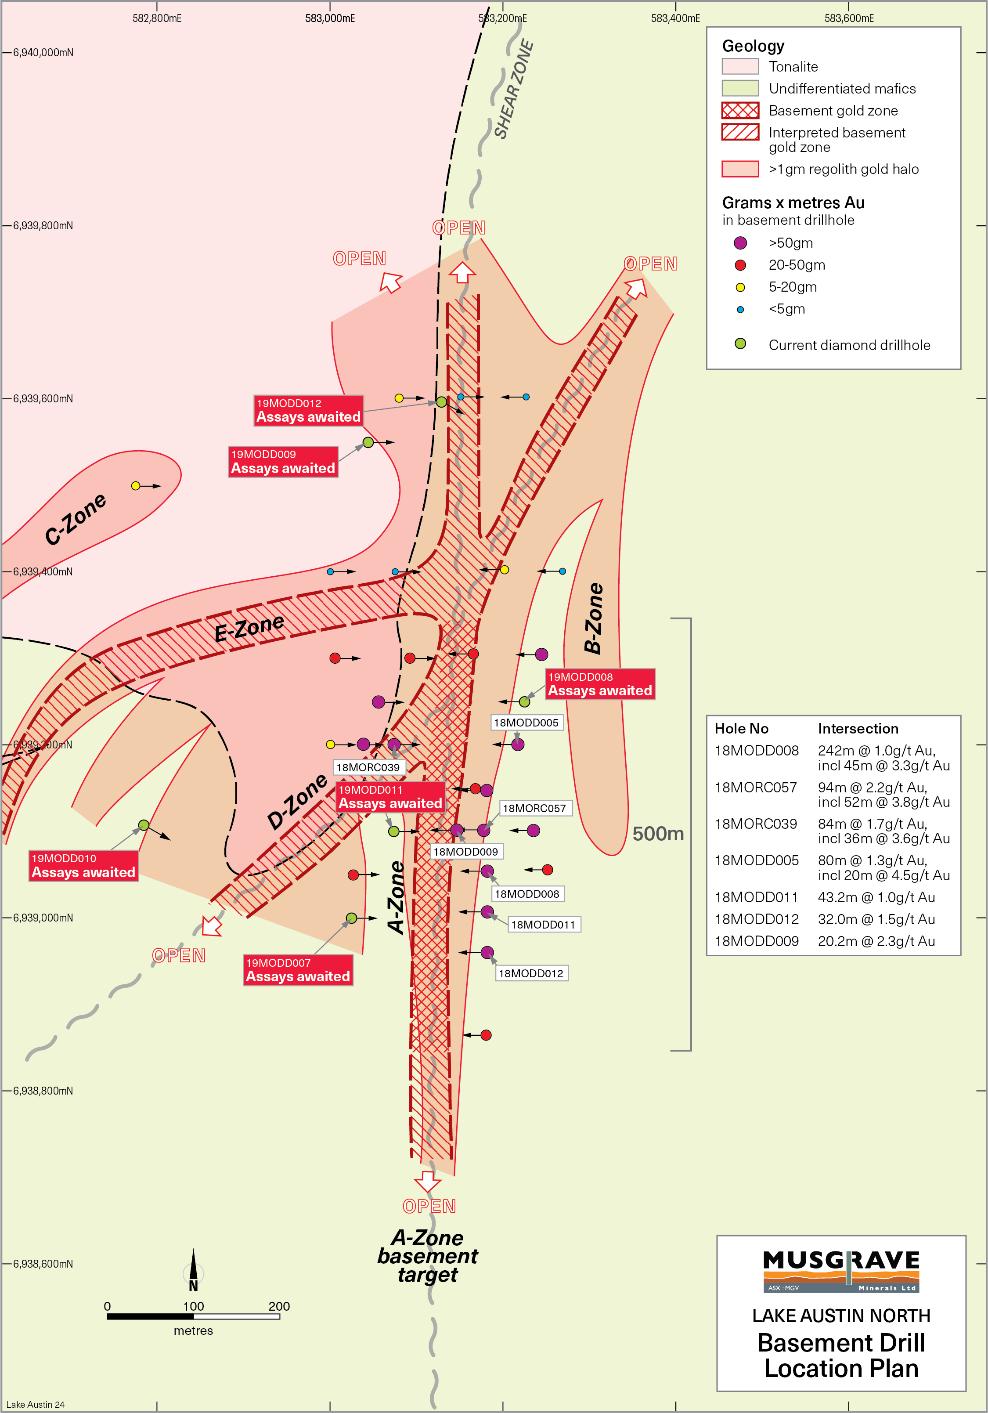 mineralisation at A-Zone (Figures 4 and 5). The program is focused on testing the Archaean basement below the significant regolith gold anomaly derived from regional aircore drilling.